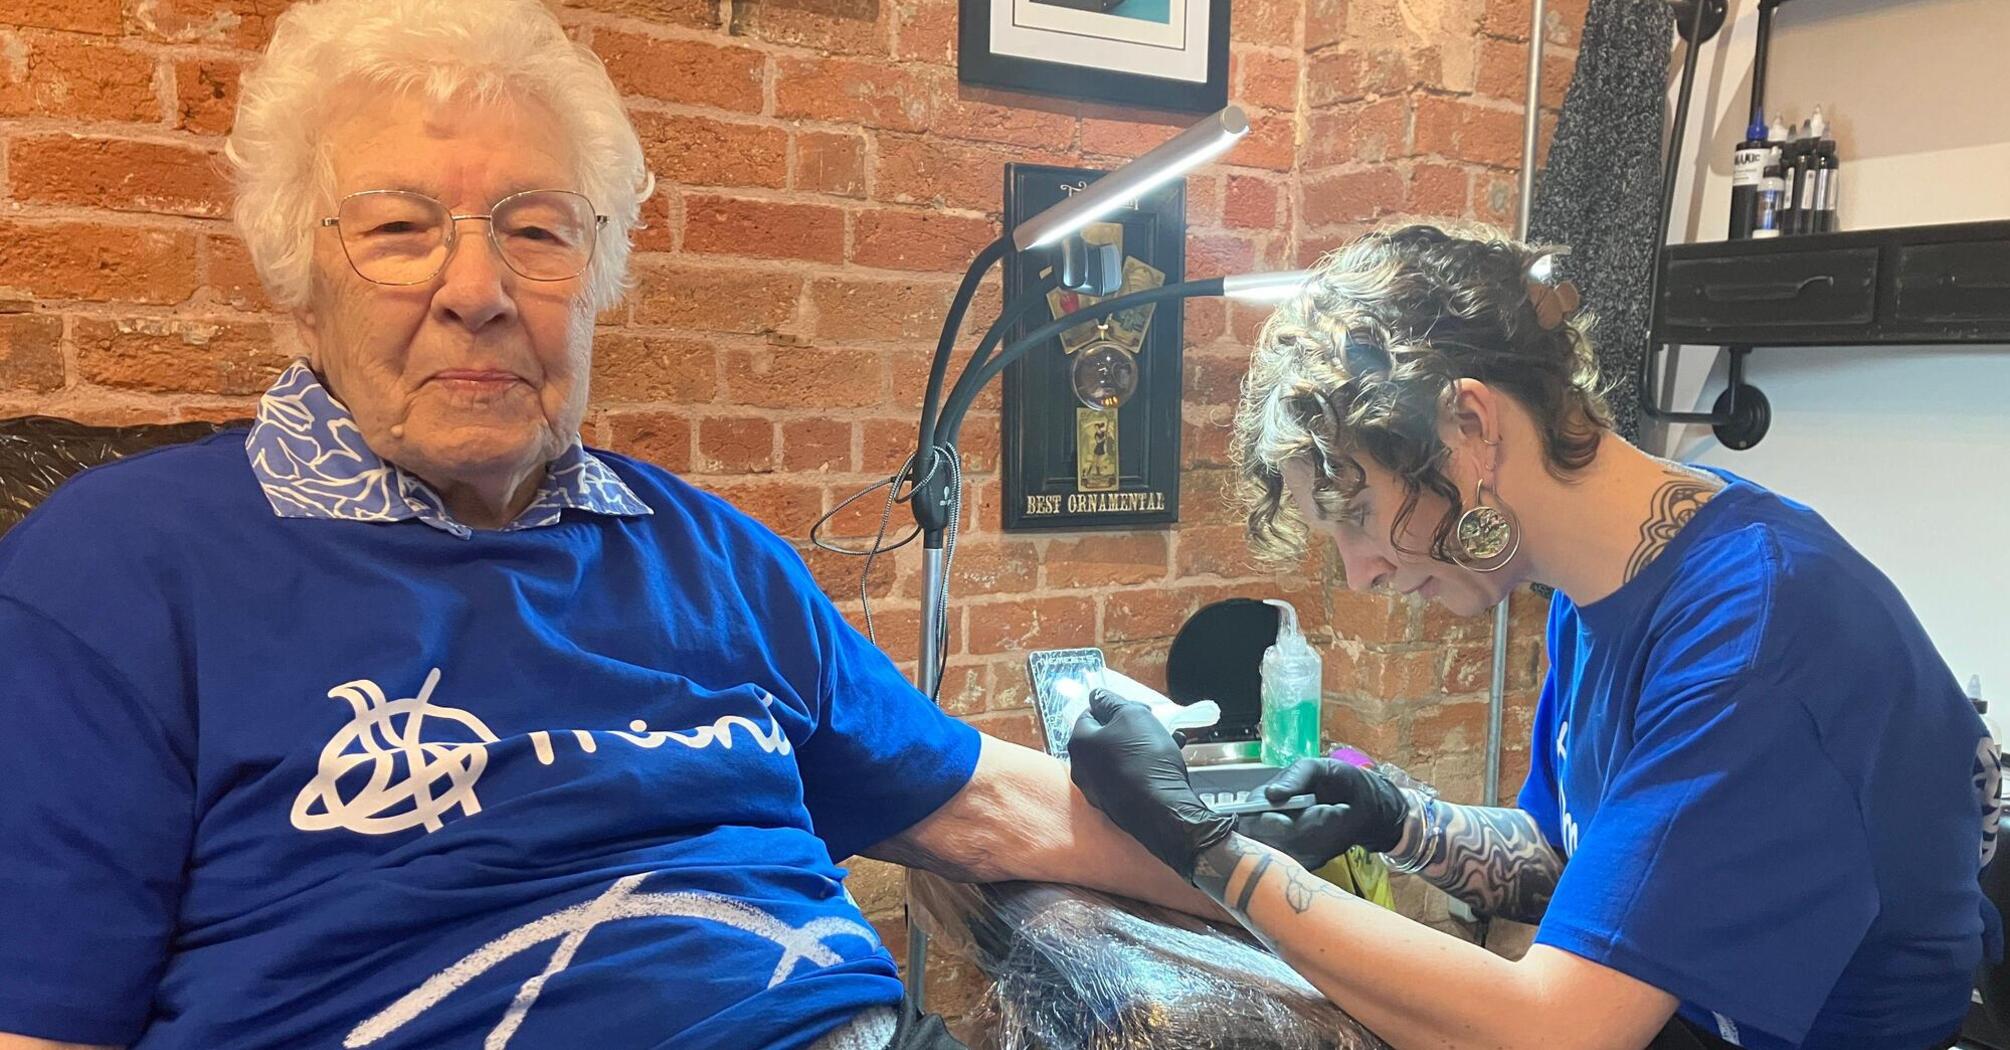 A 98-year-old grandmother got her first tattoo